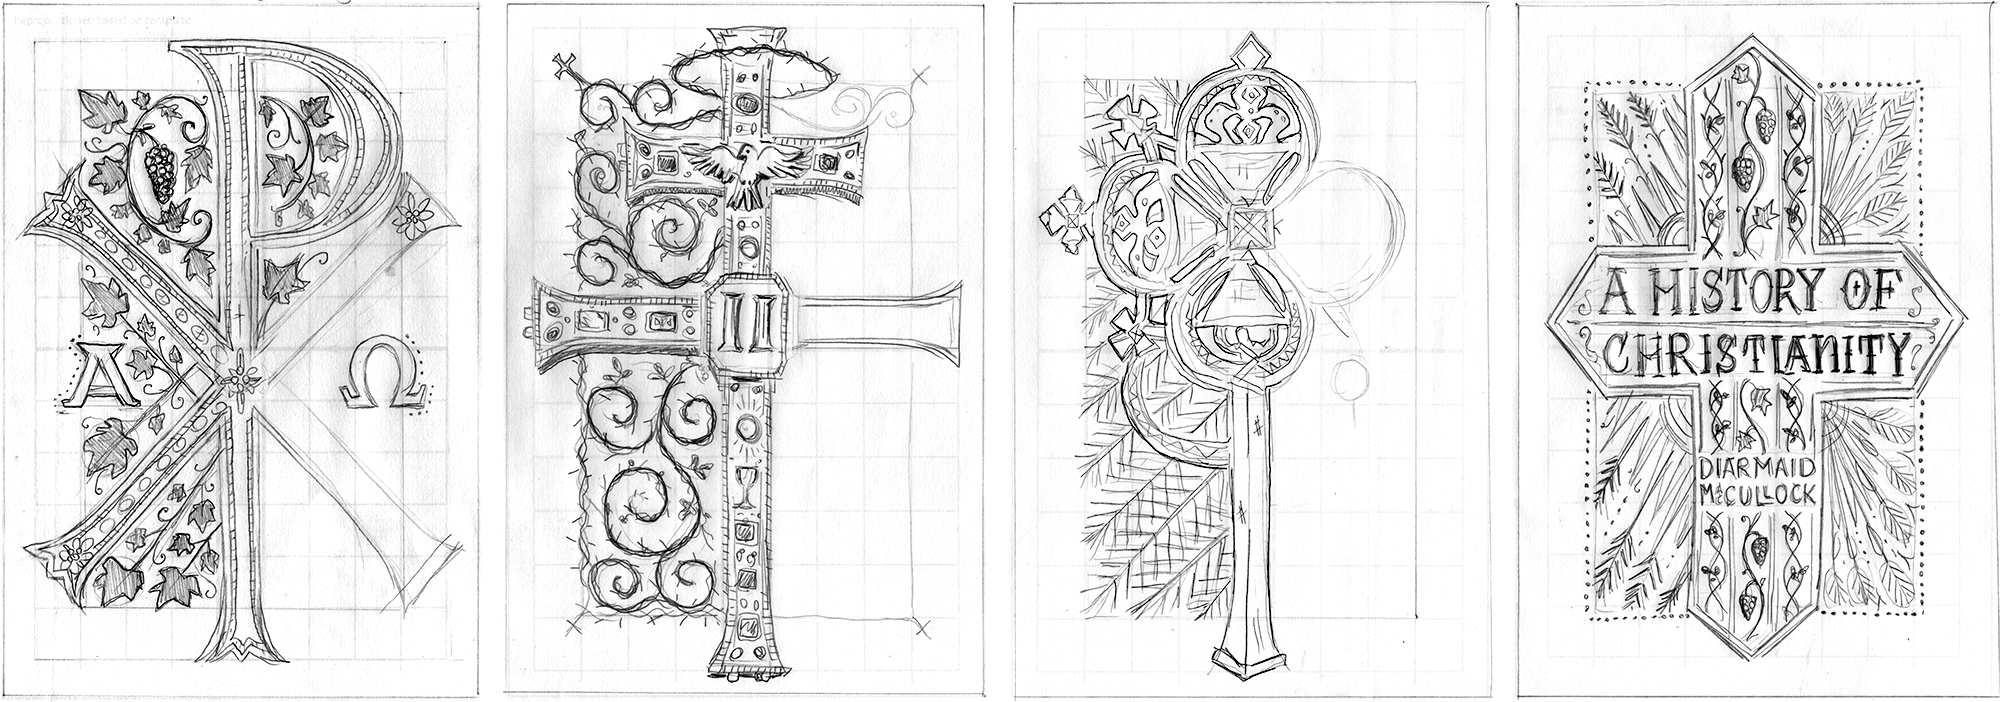 A History of Christianity, cover sketches, Folio society | Jamie Clarke Type